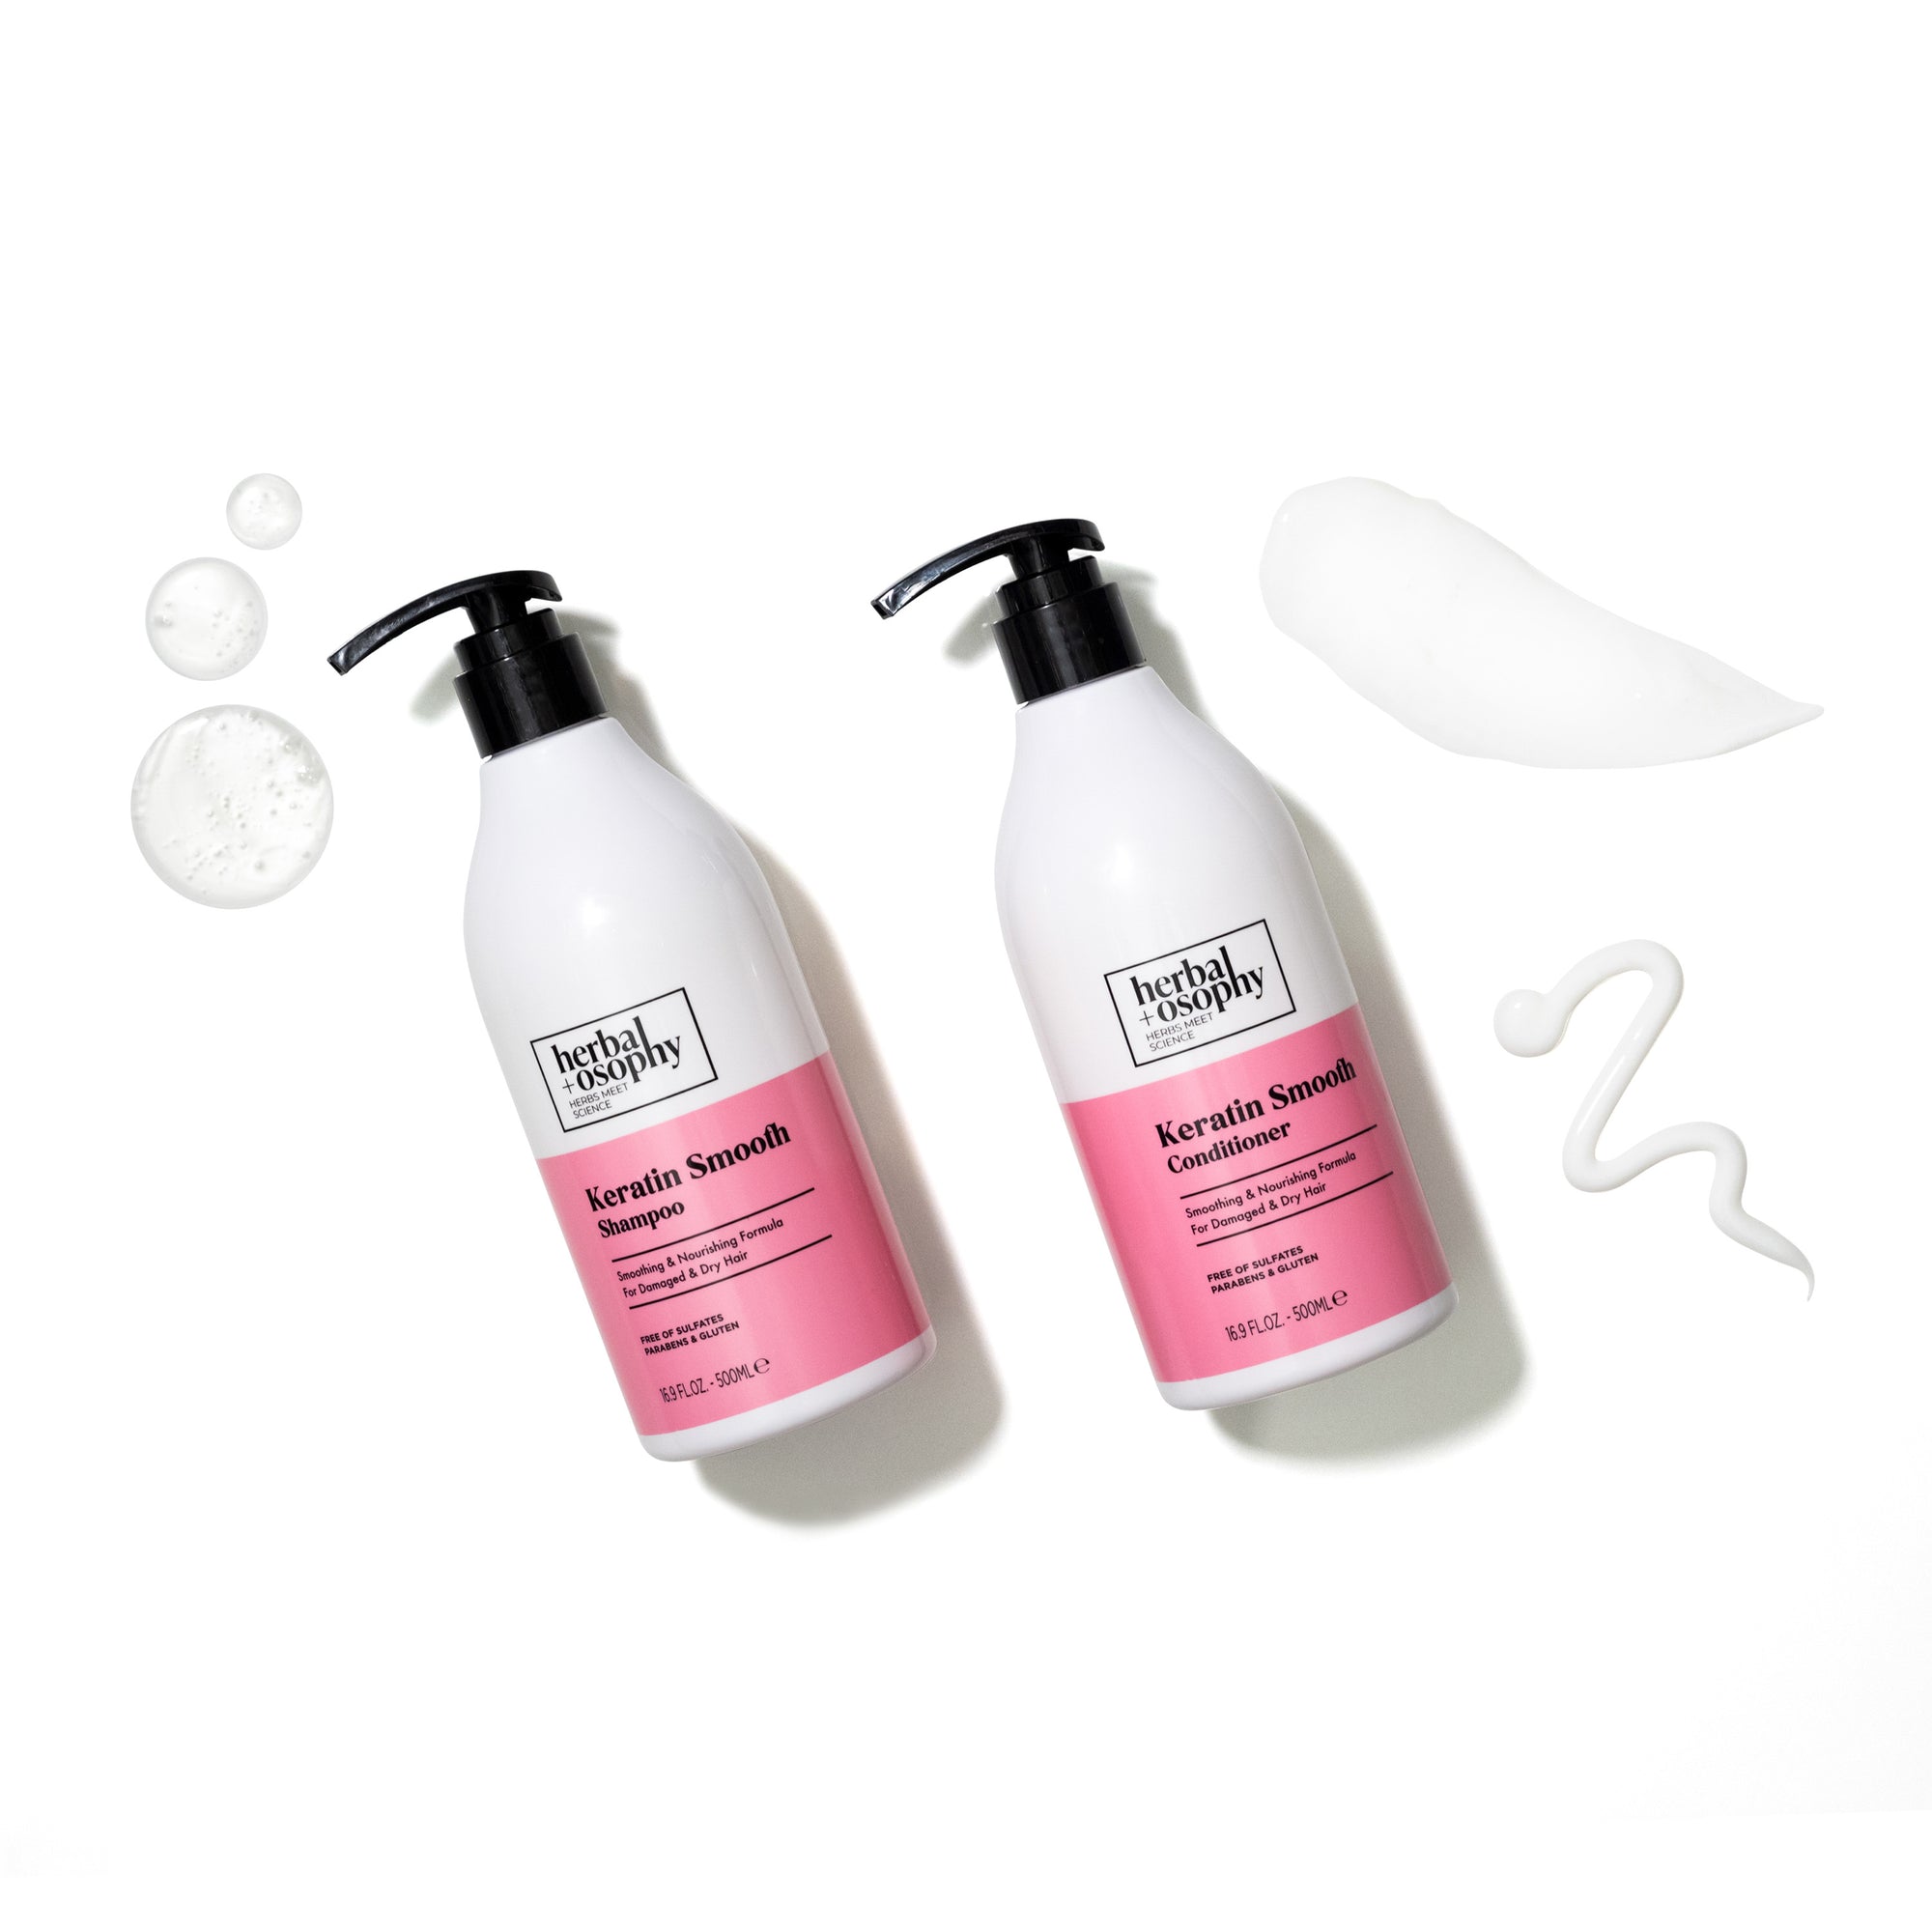 Herbalosophy Keratin Smooth Shampoo and Conditioner bottles on white background with white product drops and smears